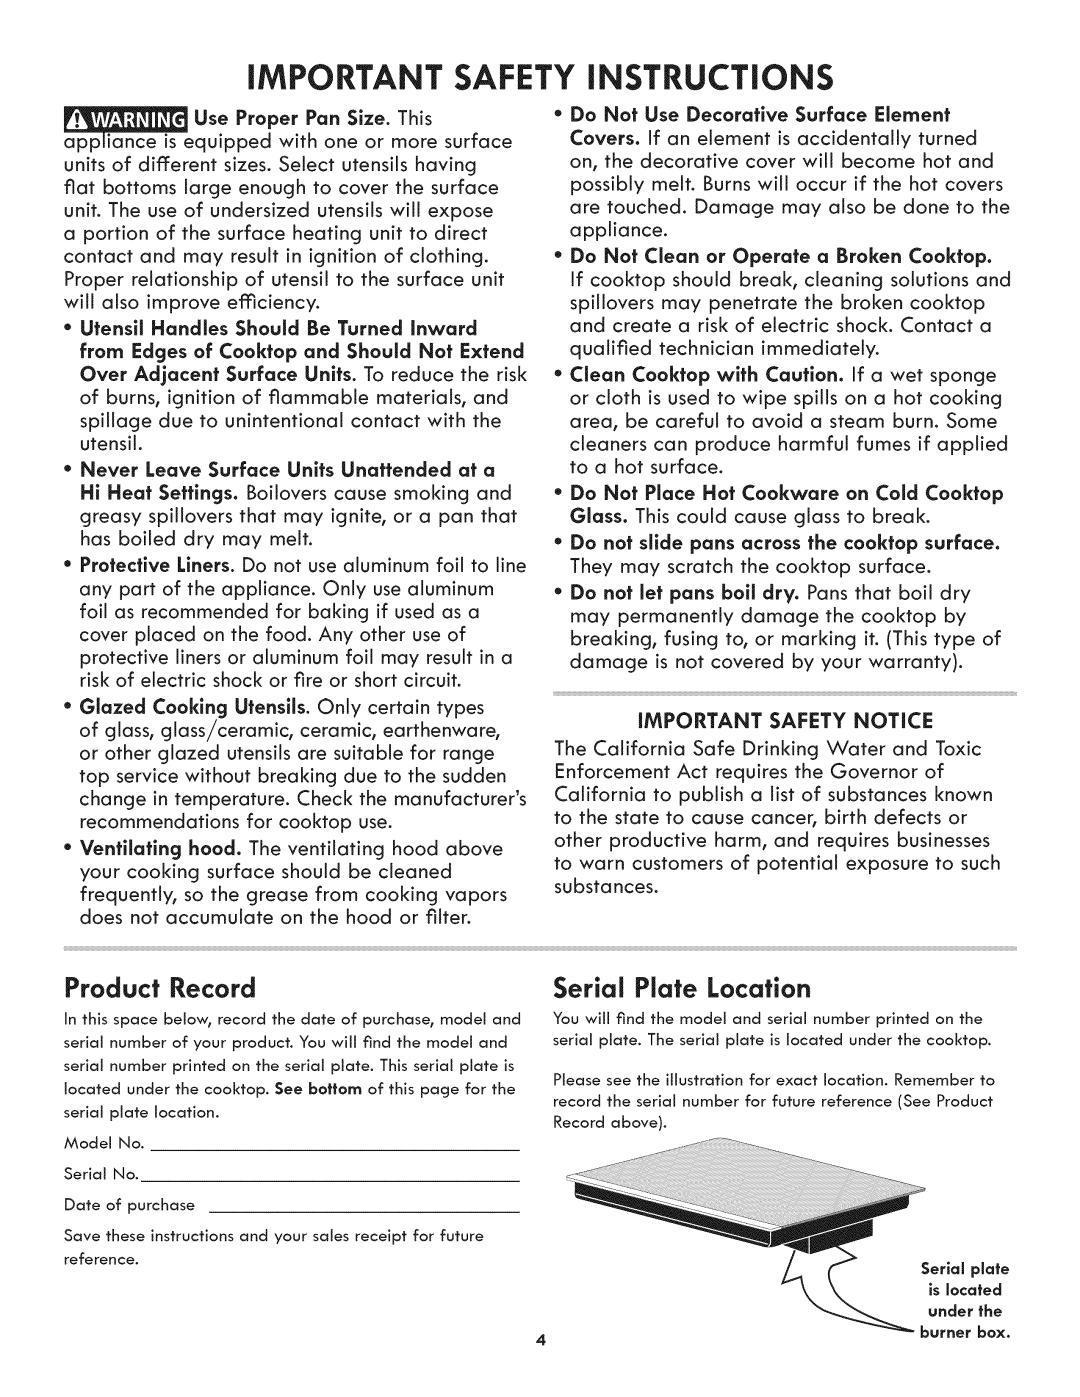 Kenmore 790.4422 manual Product Record, Serial Plate Location, iMPORTANT SAFETY iNSTRUCTiONS 